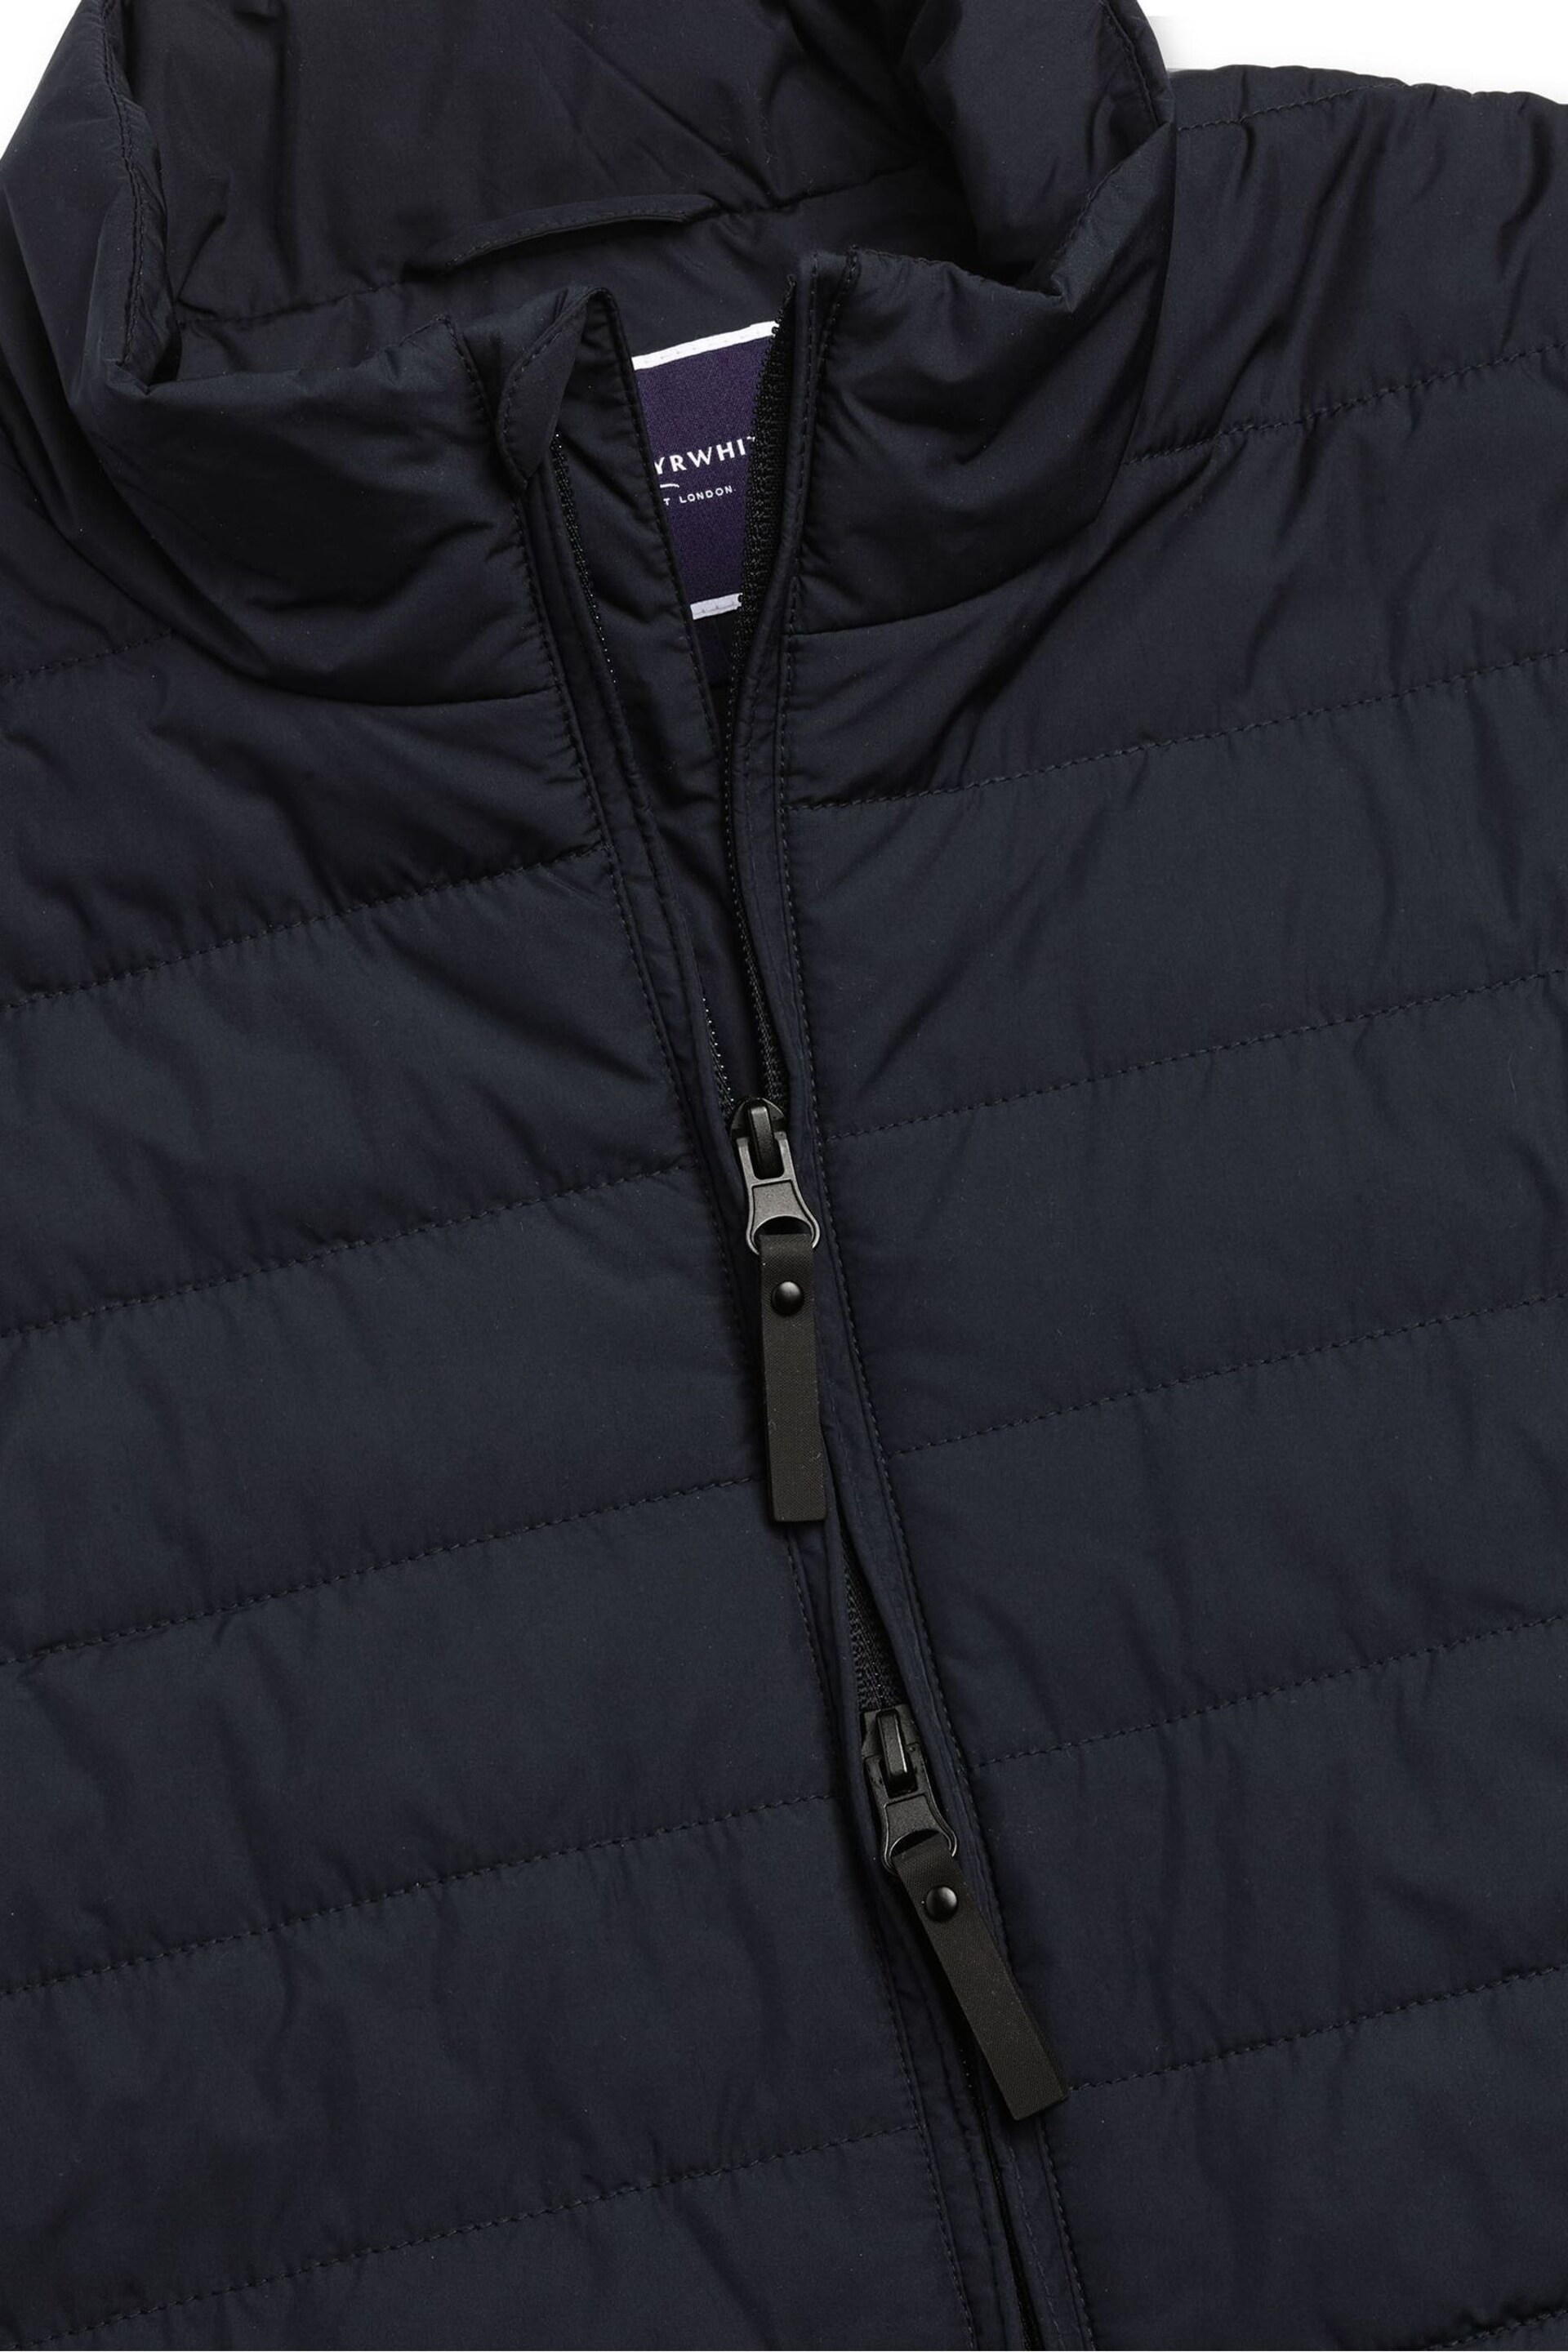 Charles Tyrwhitt Blue Weight Quilted Gilet - Image 4 of 4